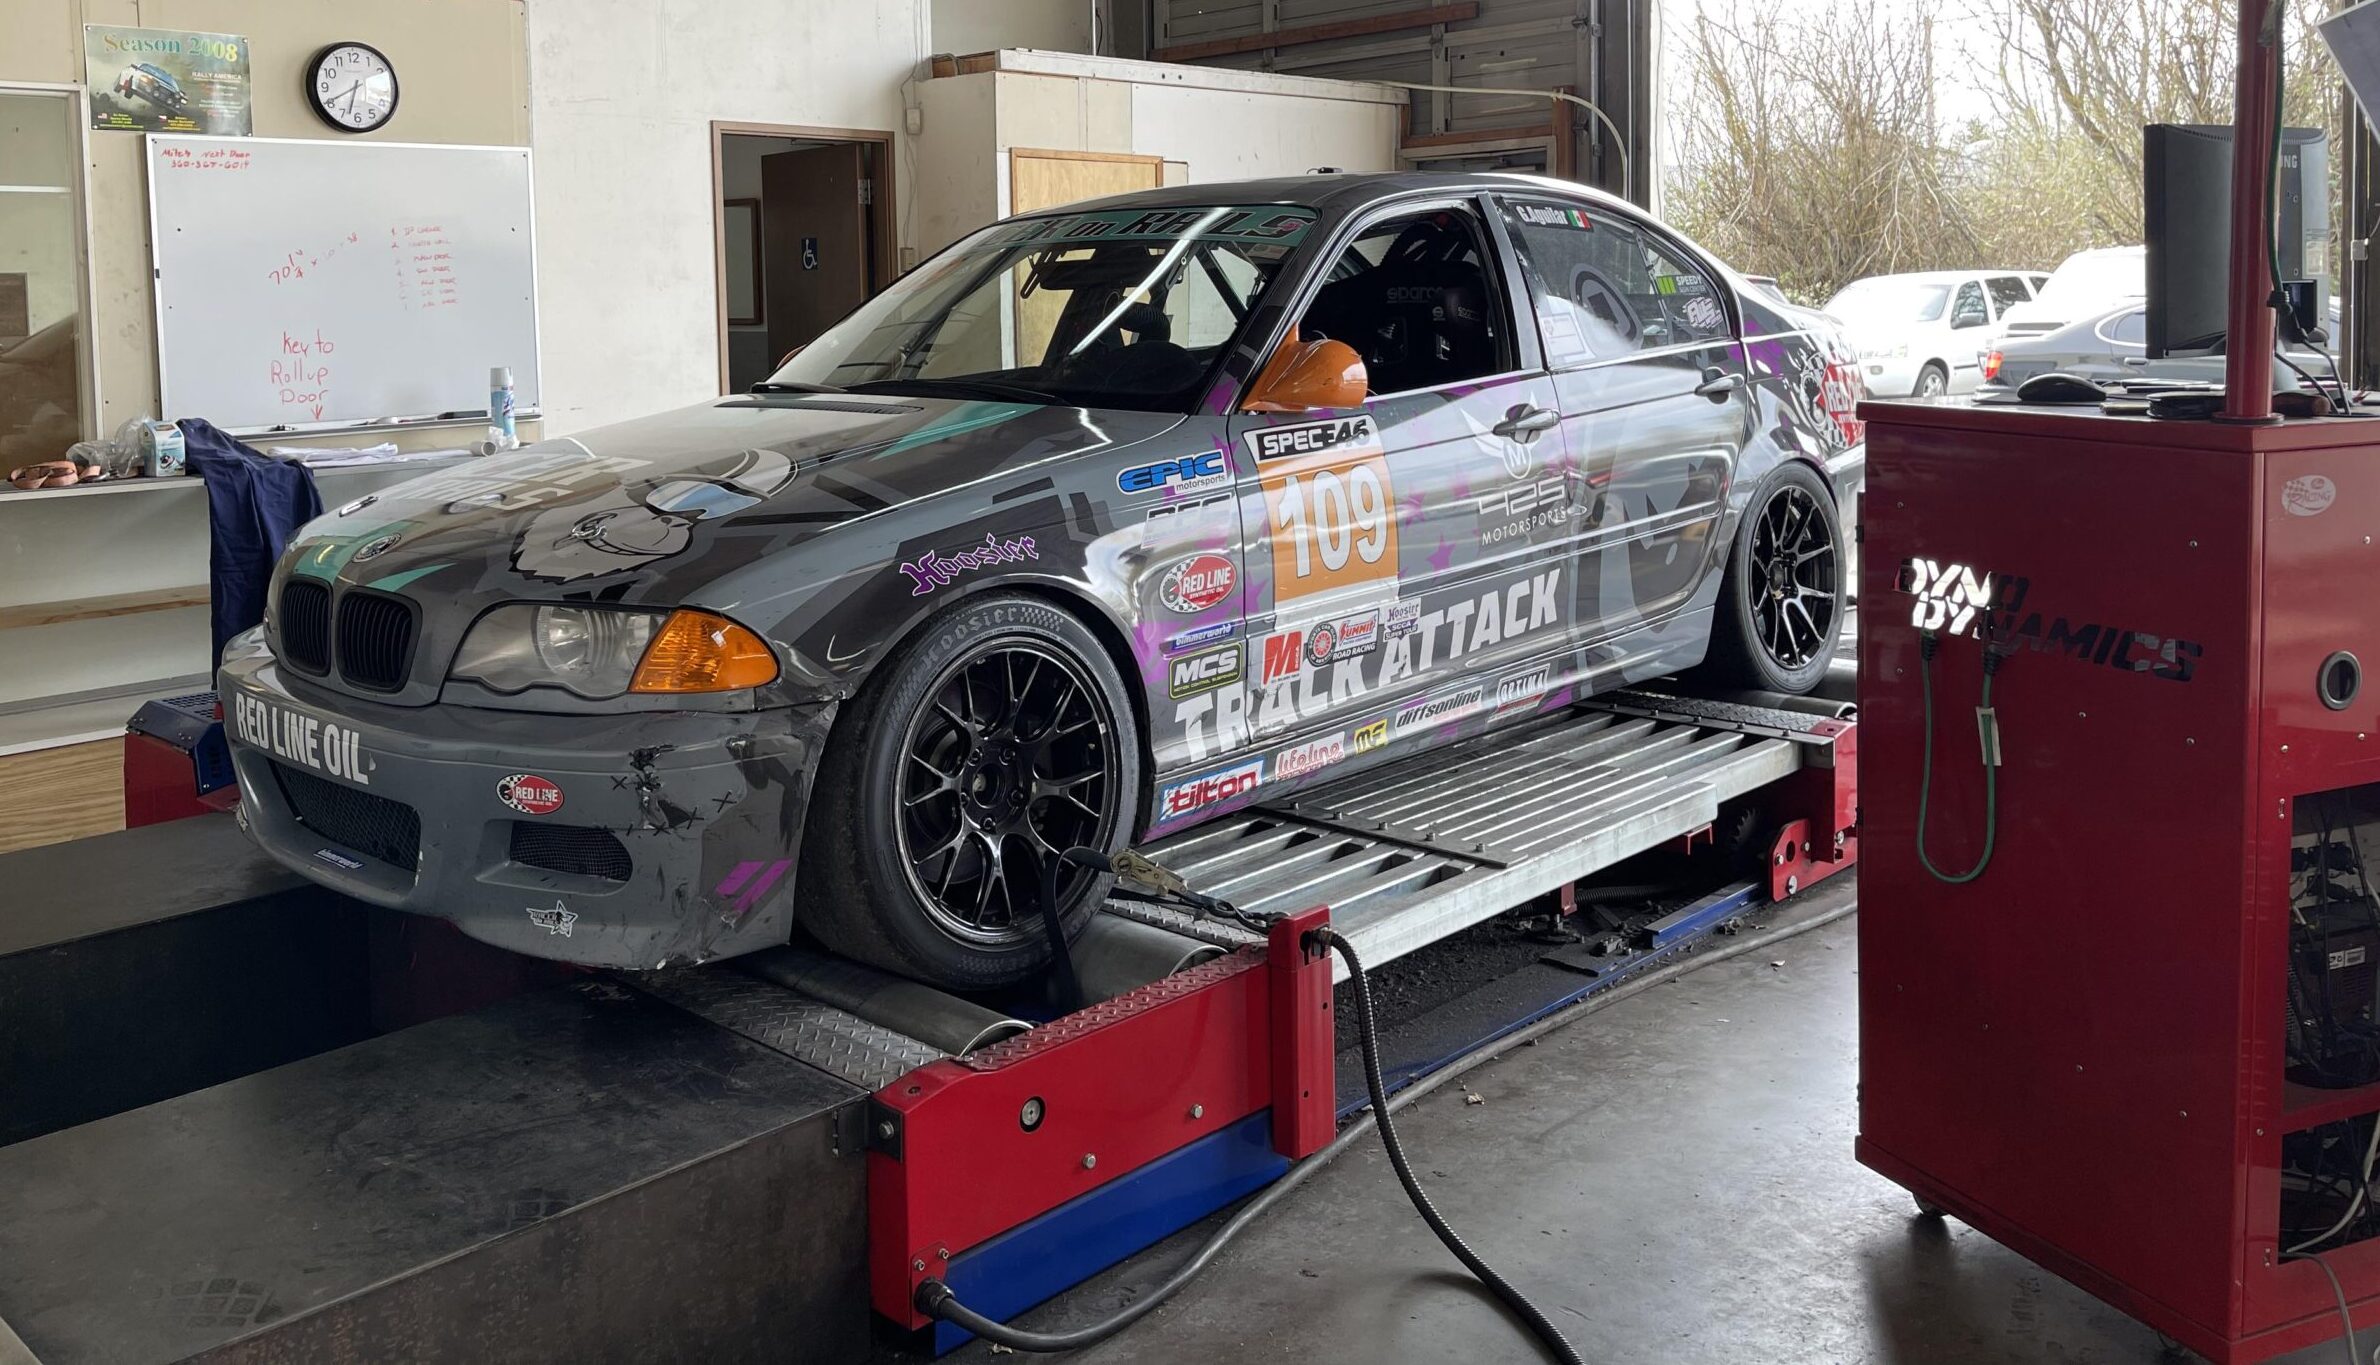 v1.2 of the Assetto Corsa Spec E46 is now available – Racer on Rails: High  Performance Track and Race Car Shop and Race Team based in Renton, WA